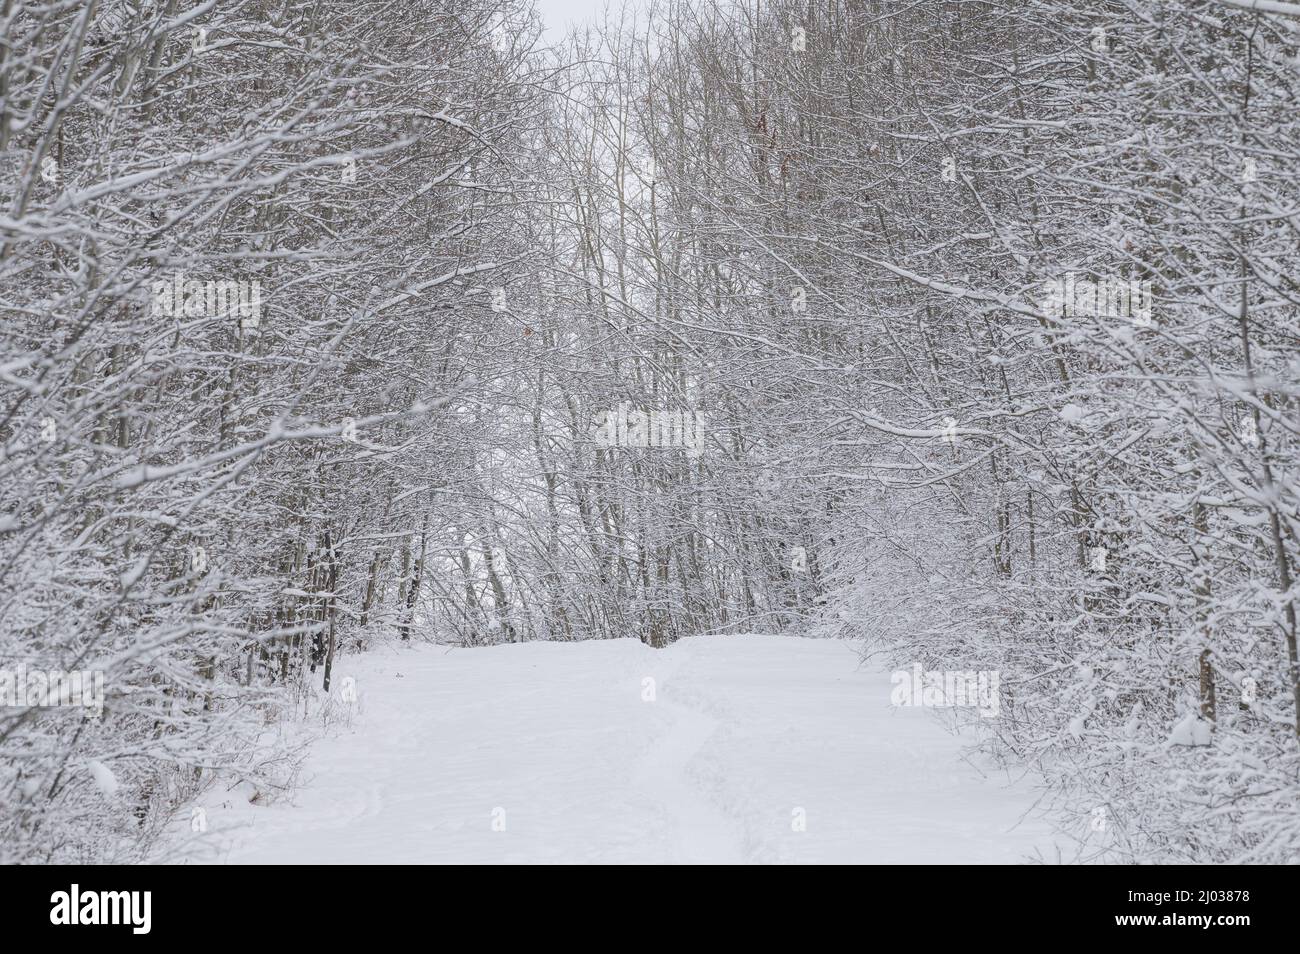 Snow and hoar frost in a winter forest, Boreal Forest, Elk Island National Park, Alberta, Canada, North America Stock Photo